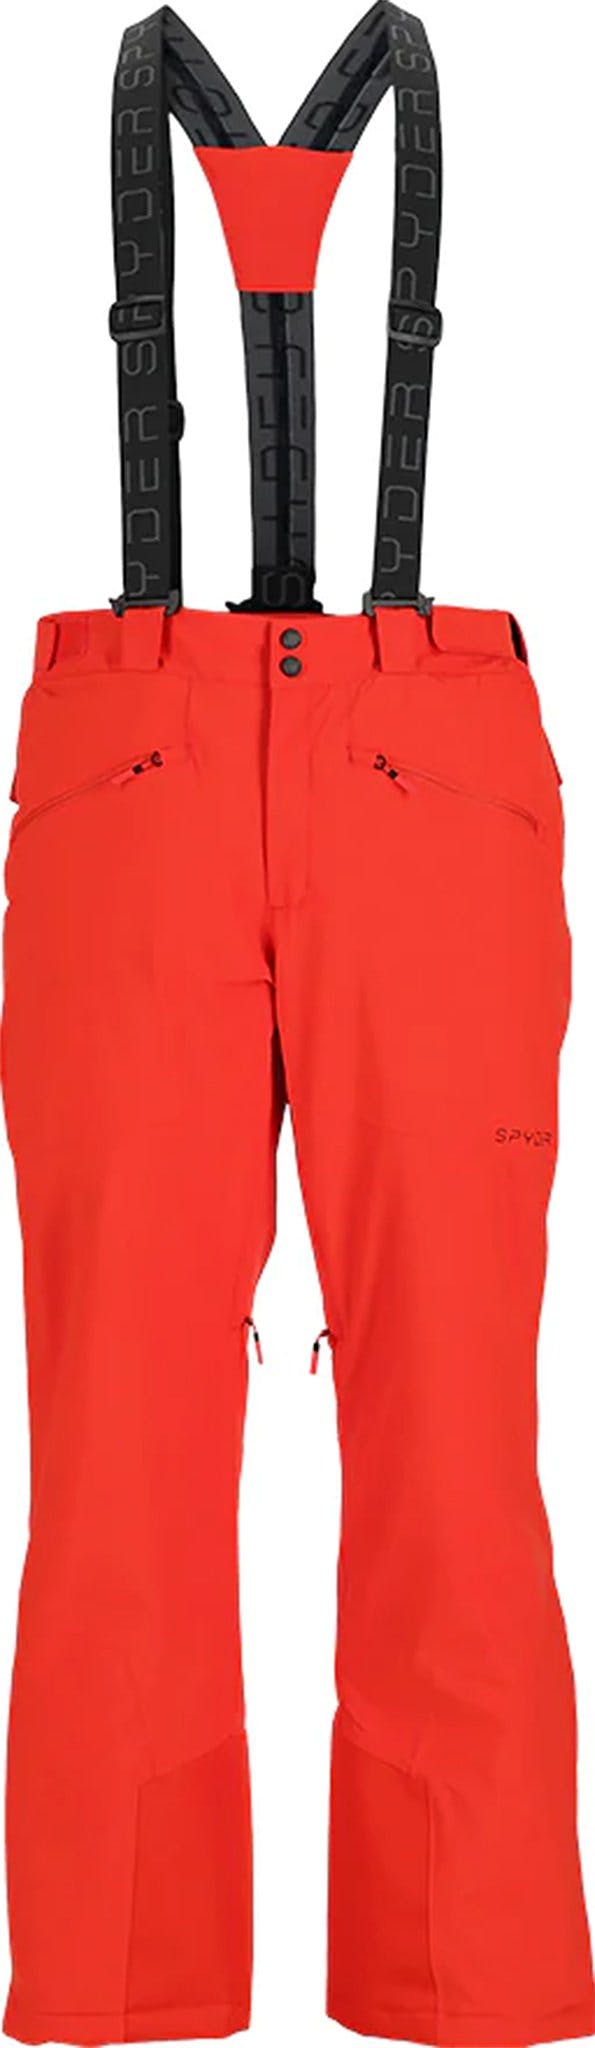 Product image for Sentinel Insulated Ski Pant - Men's